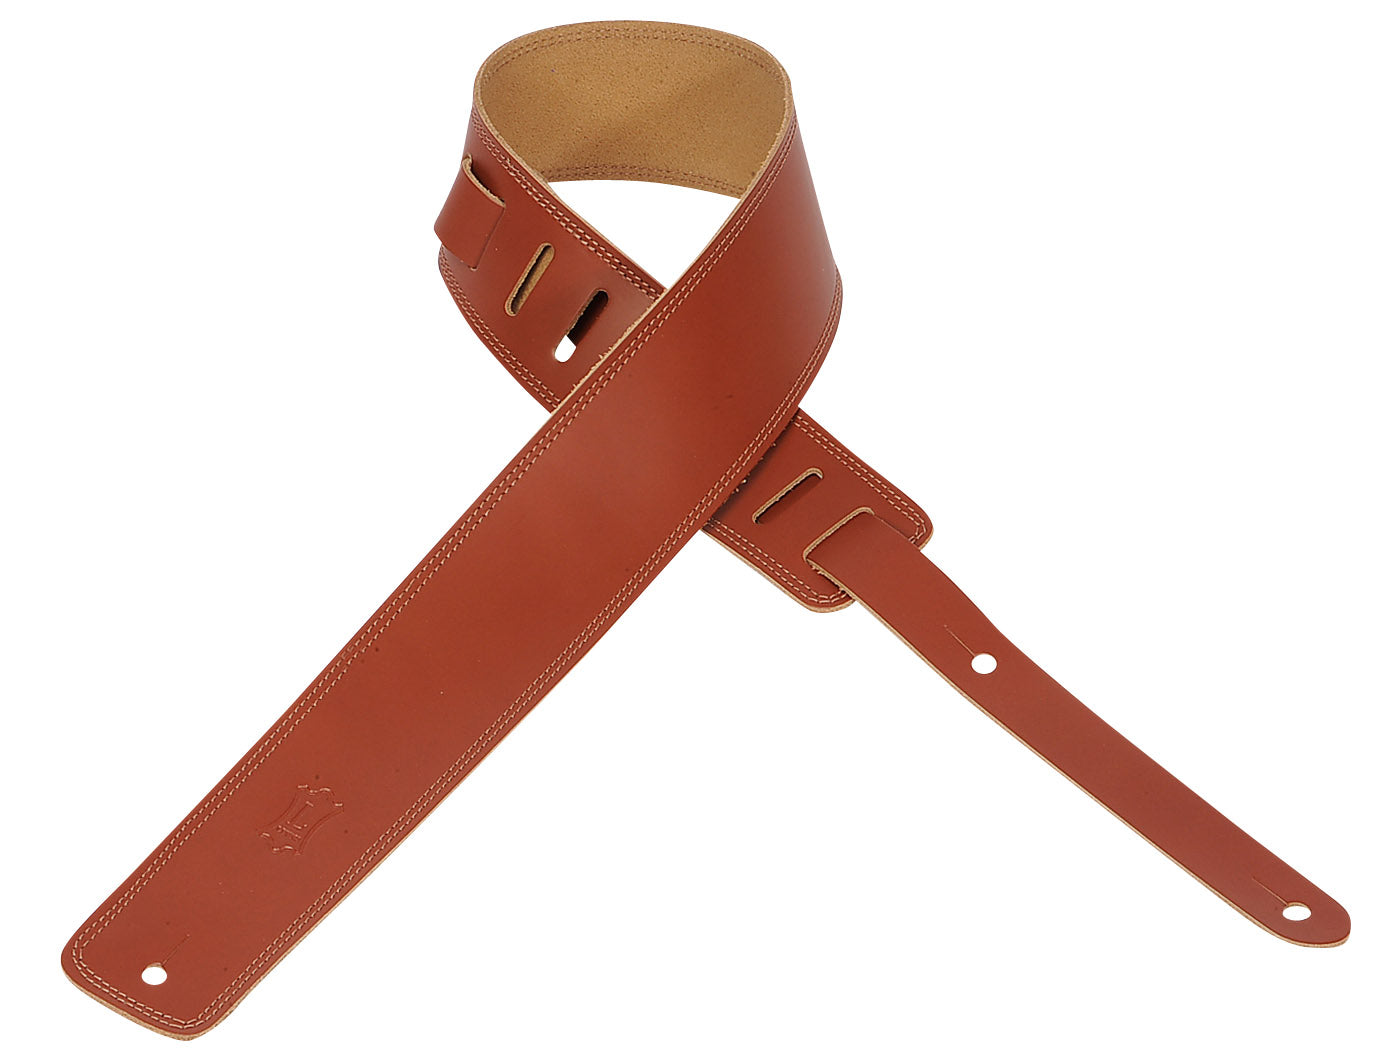 LEVY'S 2.5" LEATHER GUITAR STRAP WITH DOUBLE STITCH WALNUT